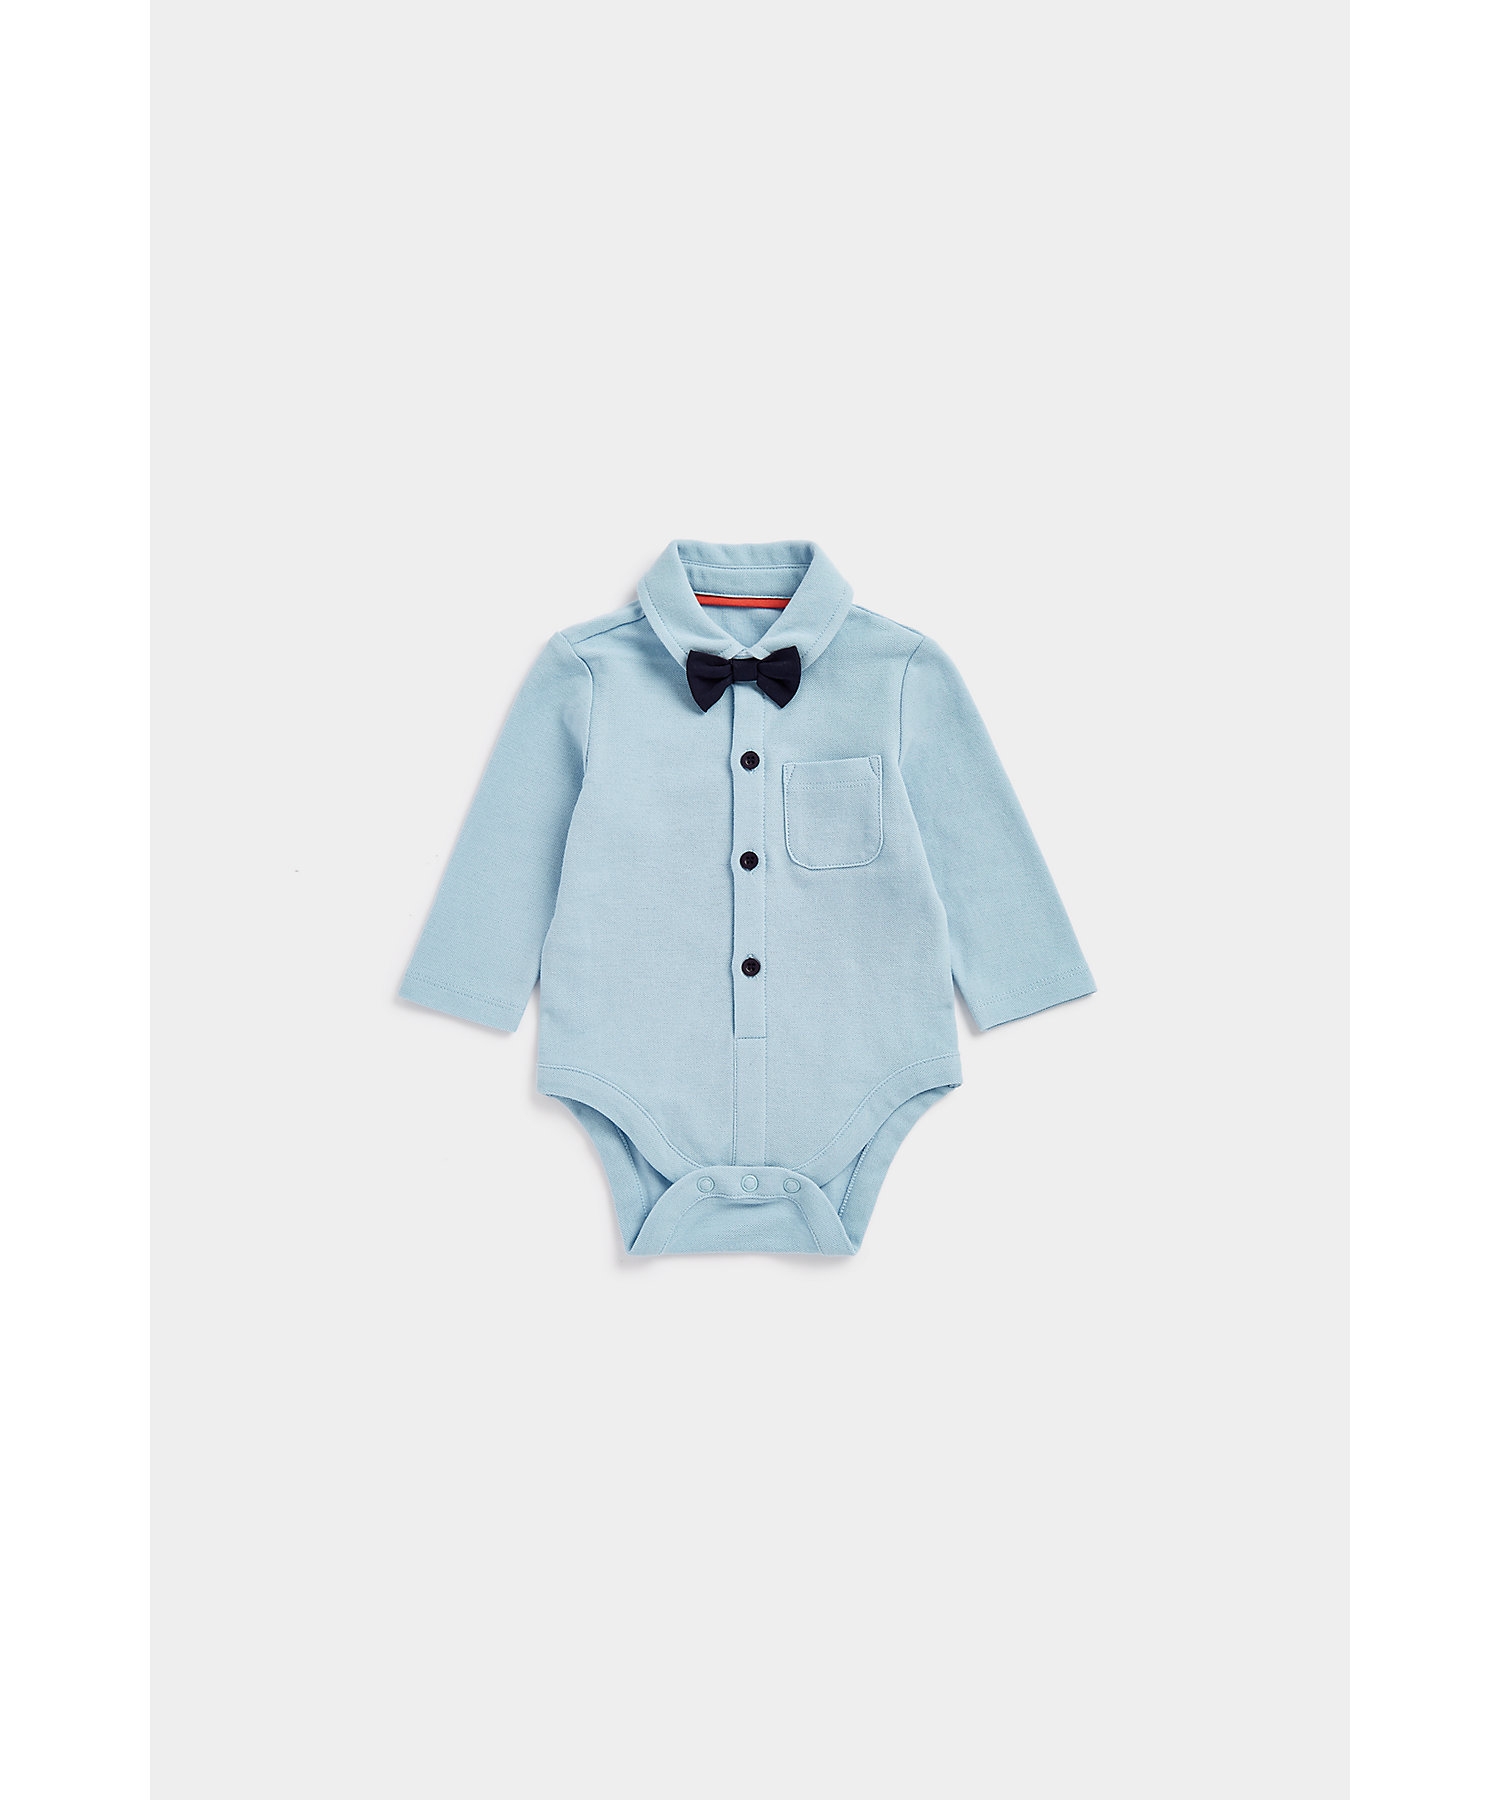 Boys Full Sleeves Partywear All In One Bow Tie-Grey